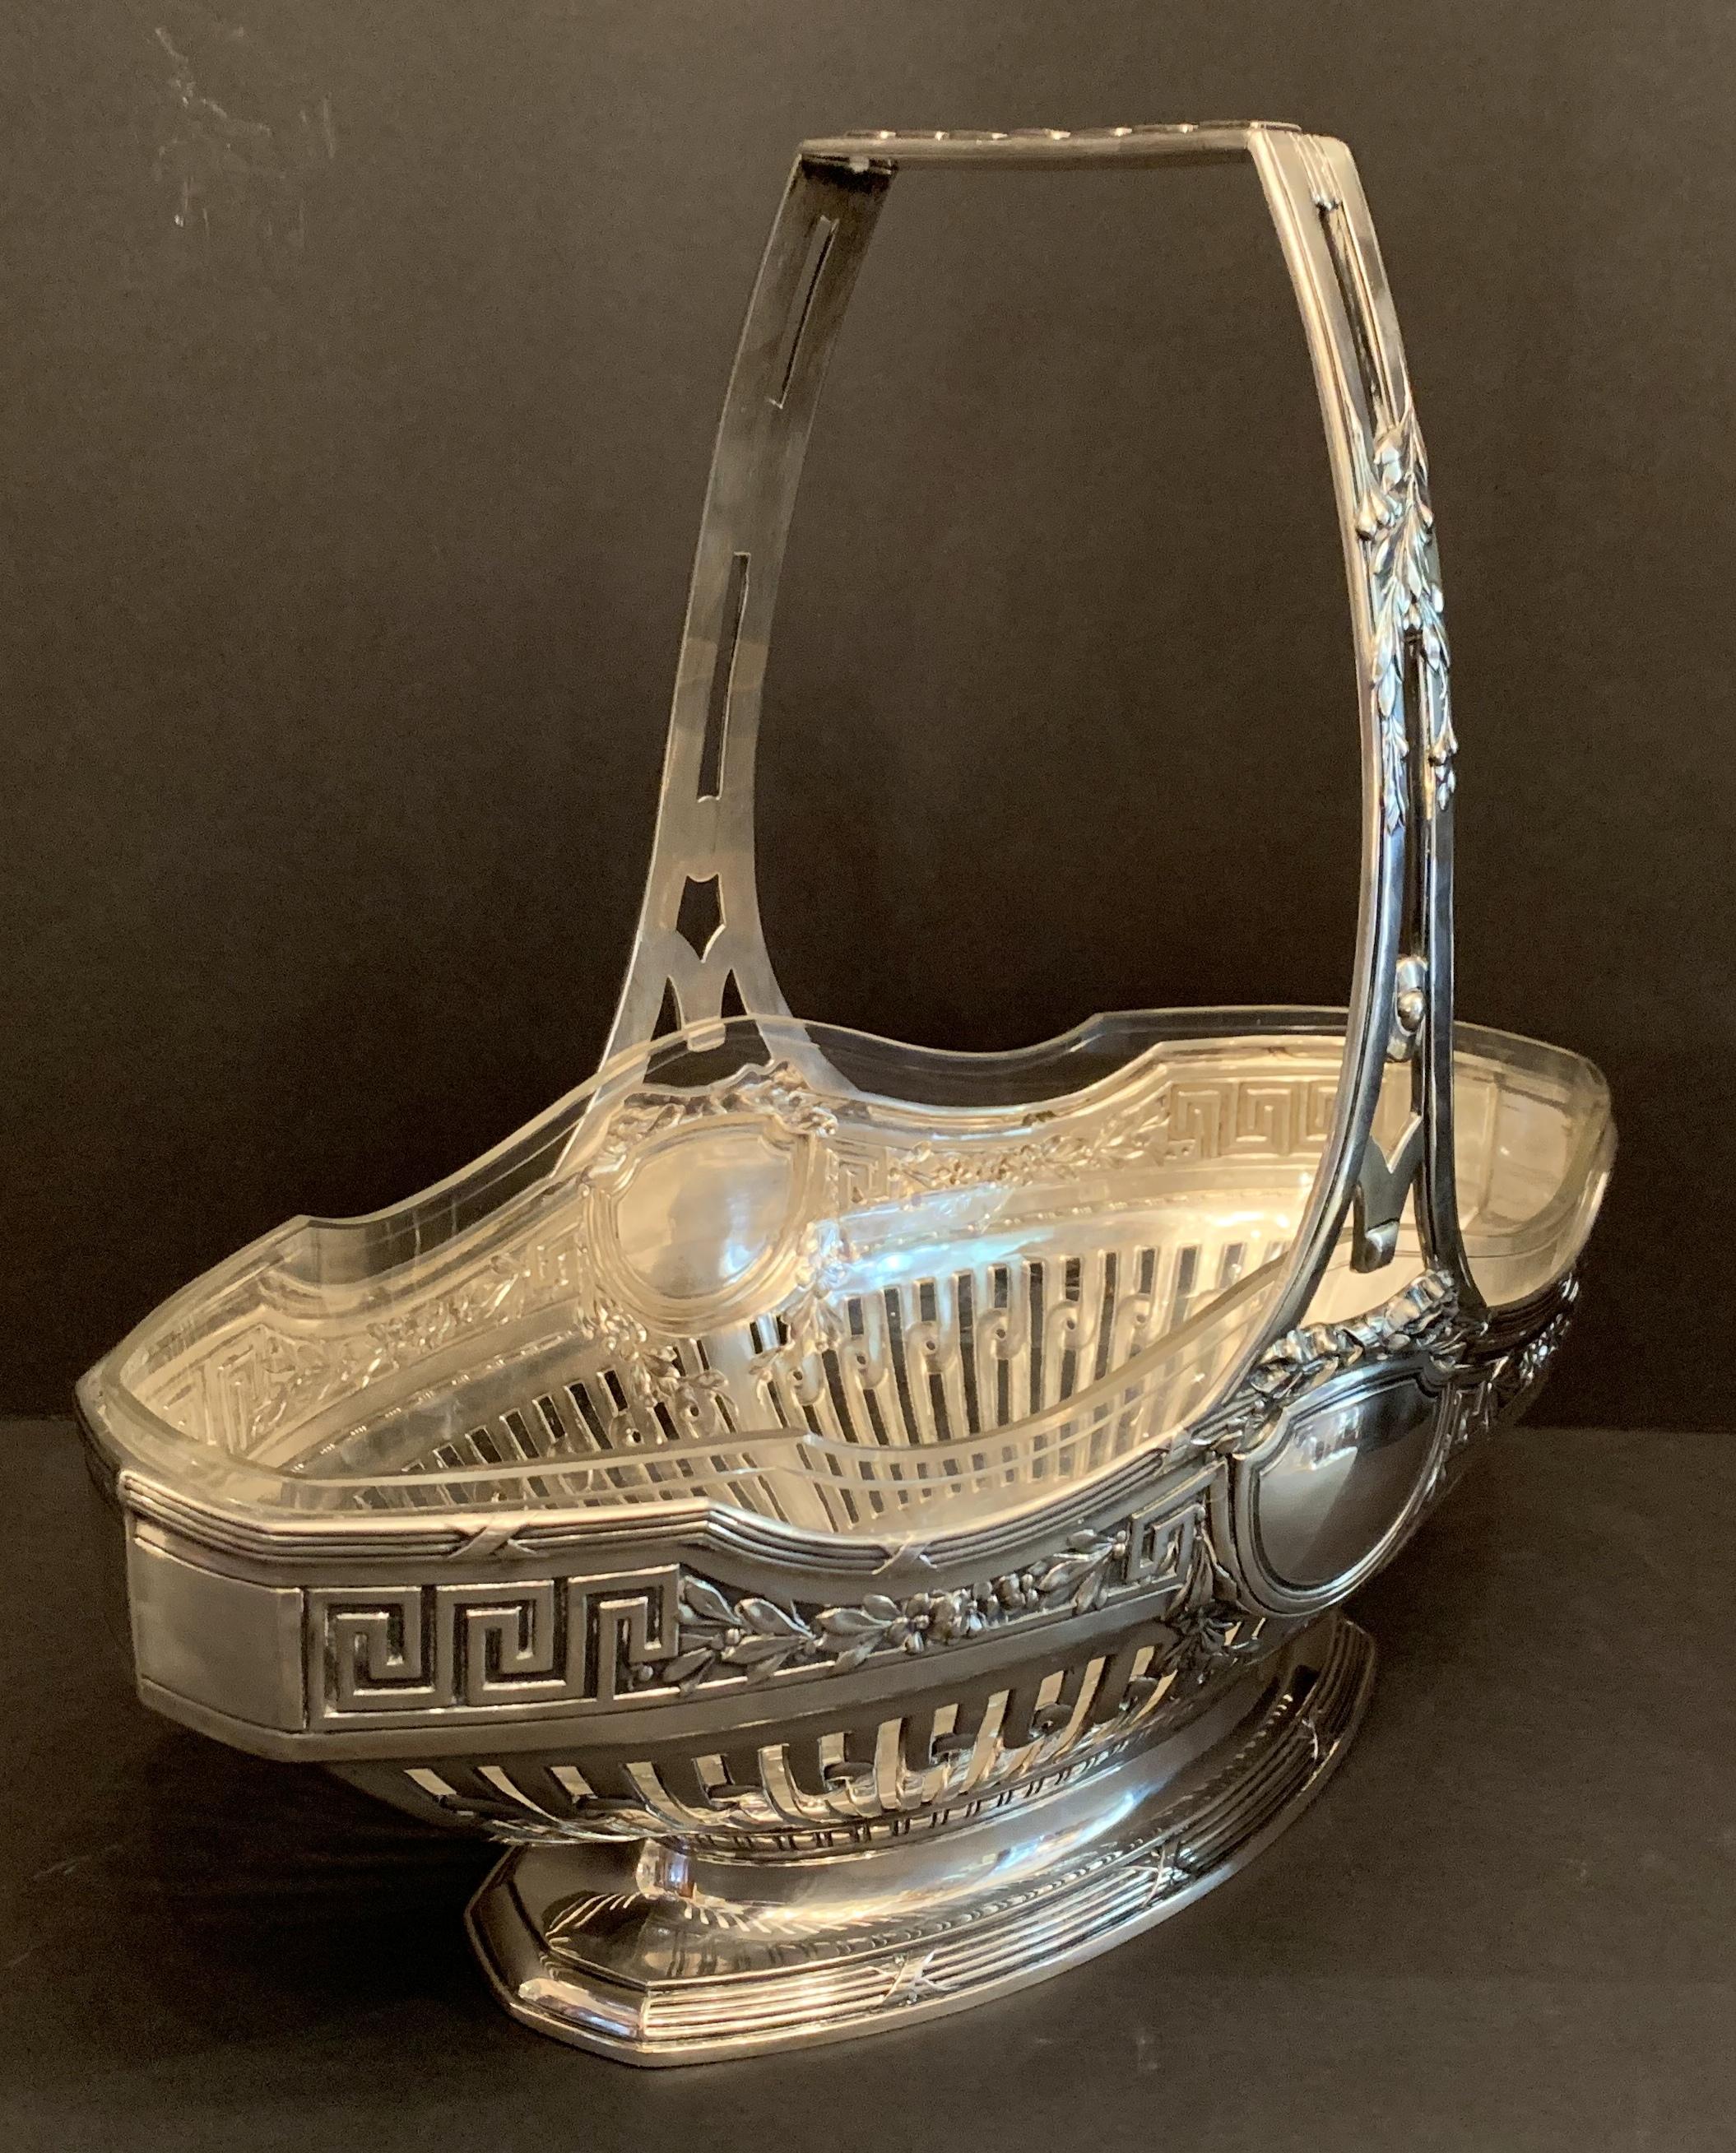 A wonderful large presentation basket with pierced work throughout and very fine details of bows, crests. By Wilhelm Binder stamped with: Moon, Crown, 800 WTB. This centerpiece was made in German using Continental 800 silver accompanied by it's